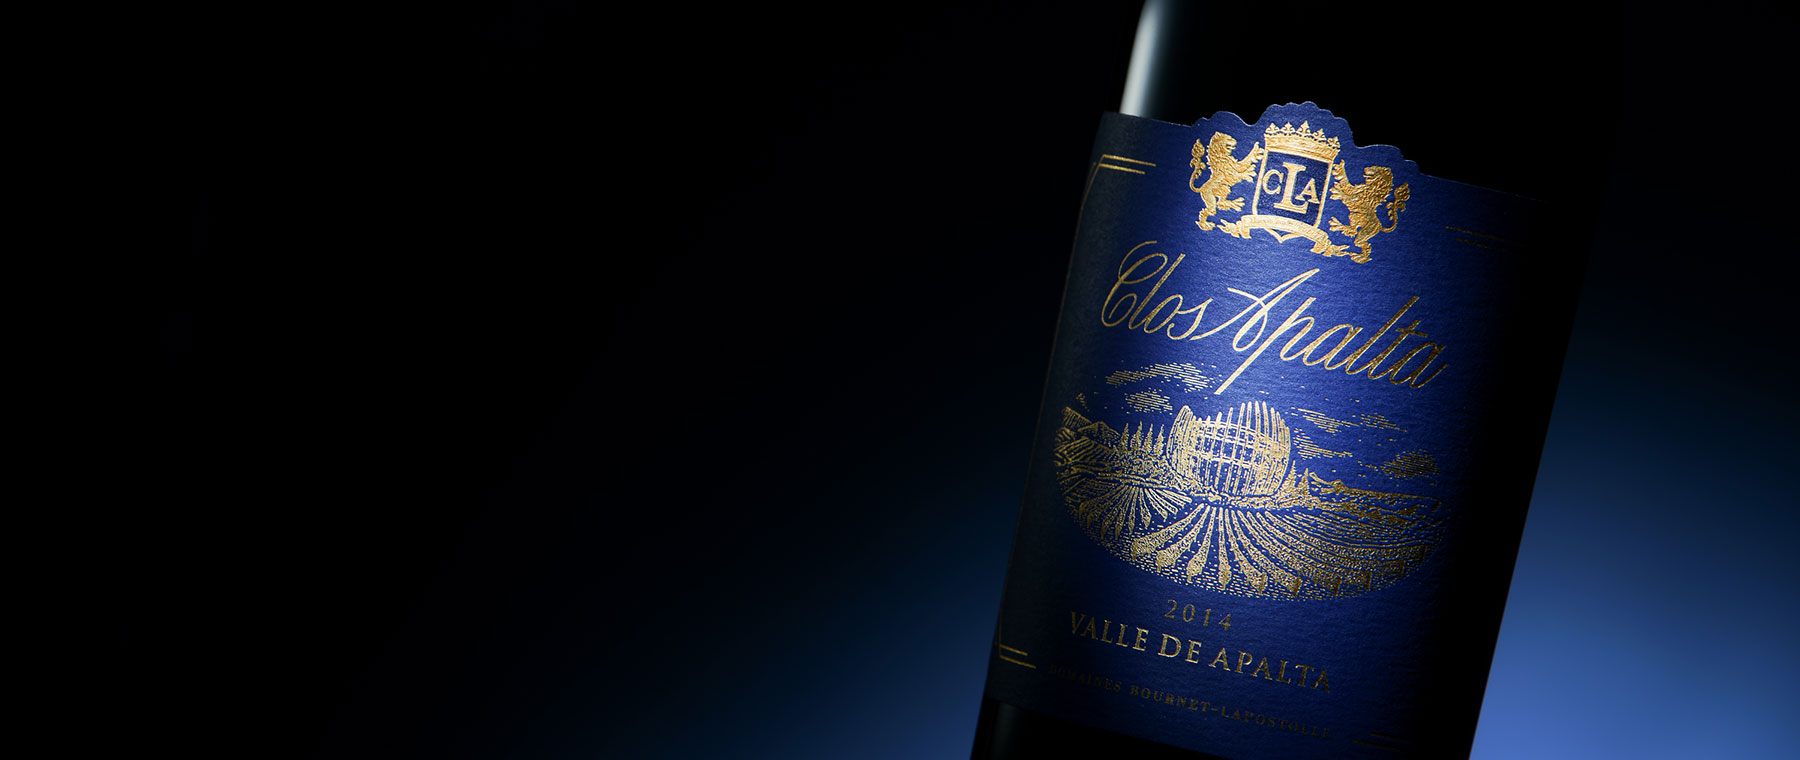 A wine that is not only the finest in Chile